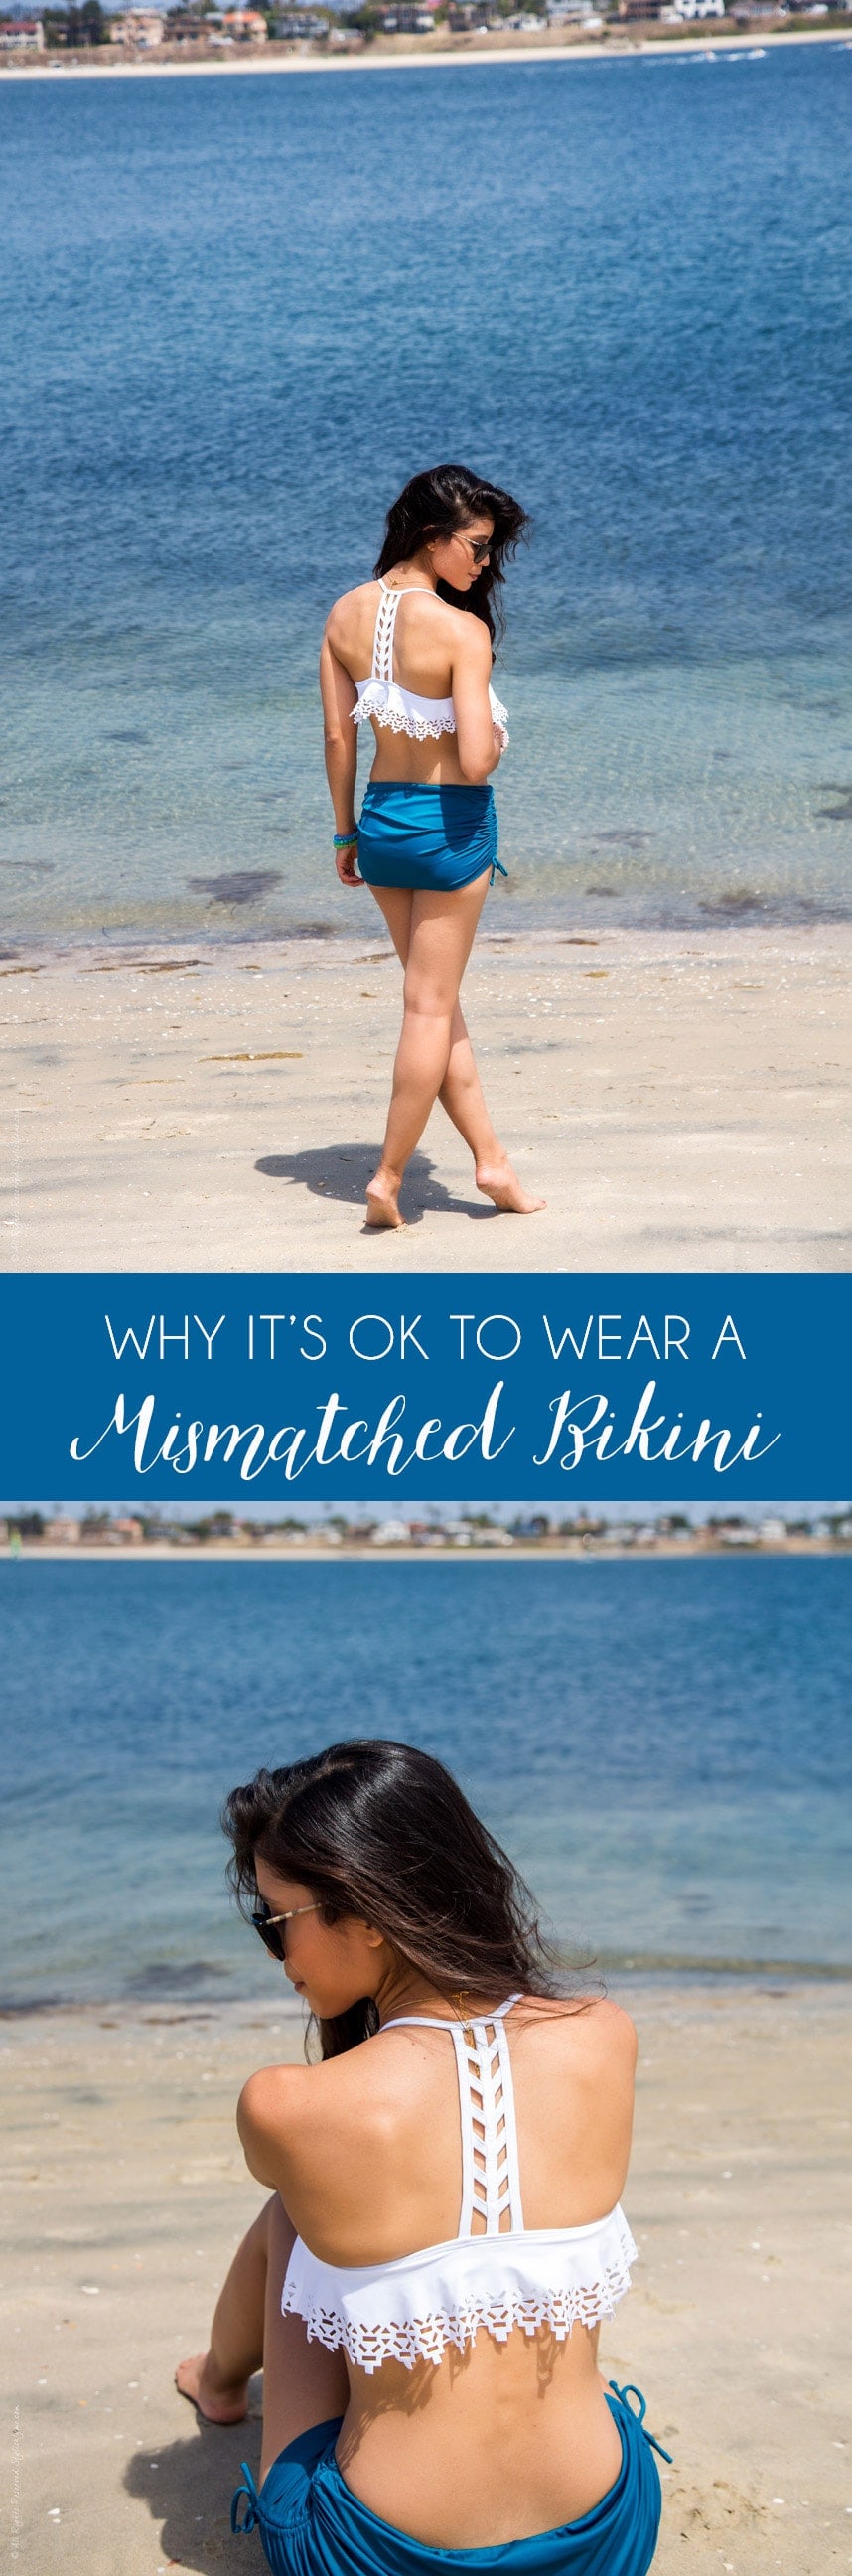 When & Why It’s Ok to Wear a Mismatched Bikini - Visit Stylishlyme.com to read the style post and view more photos